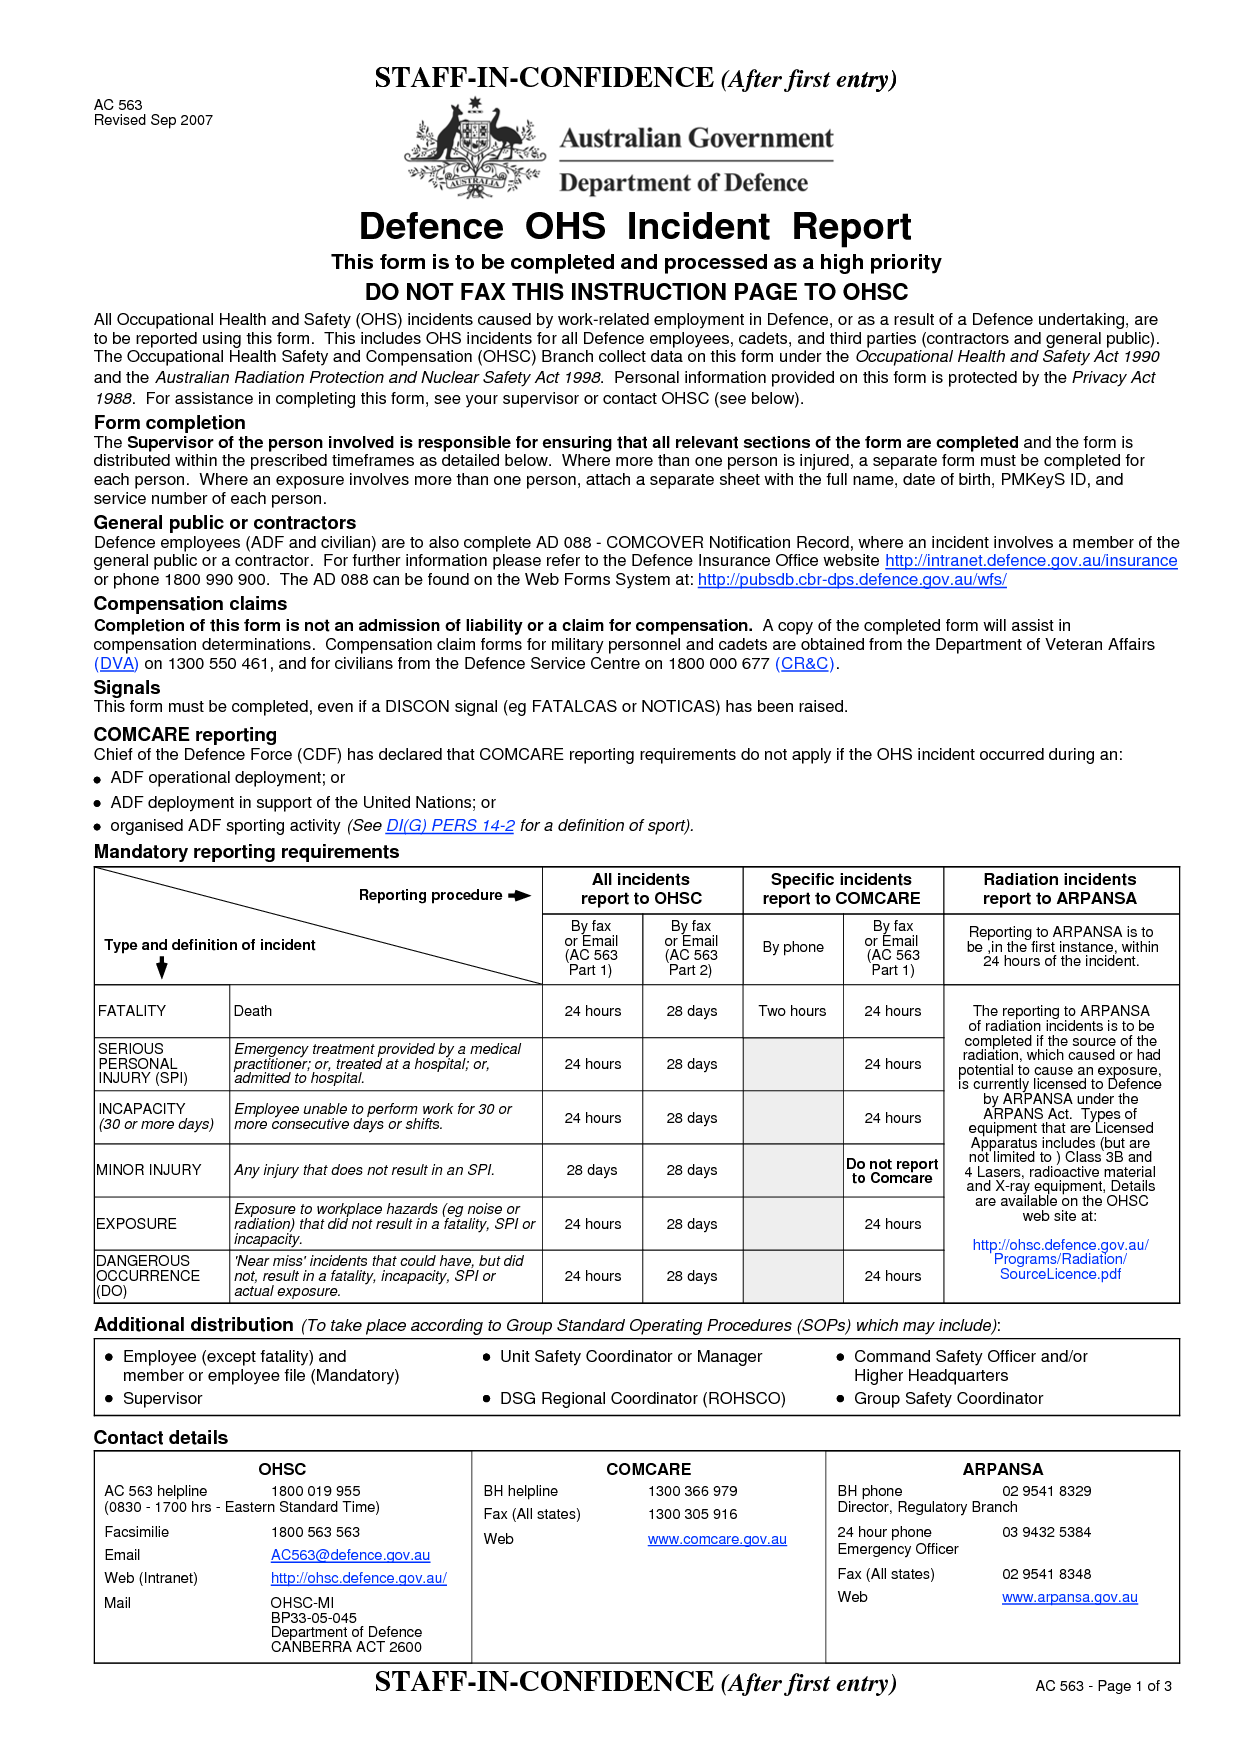 Information Security Incident Report Template